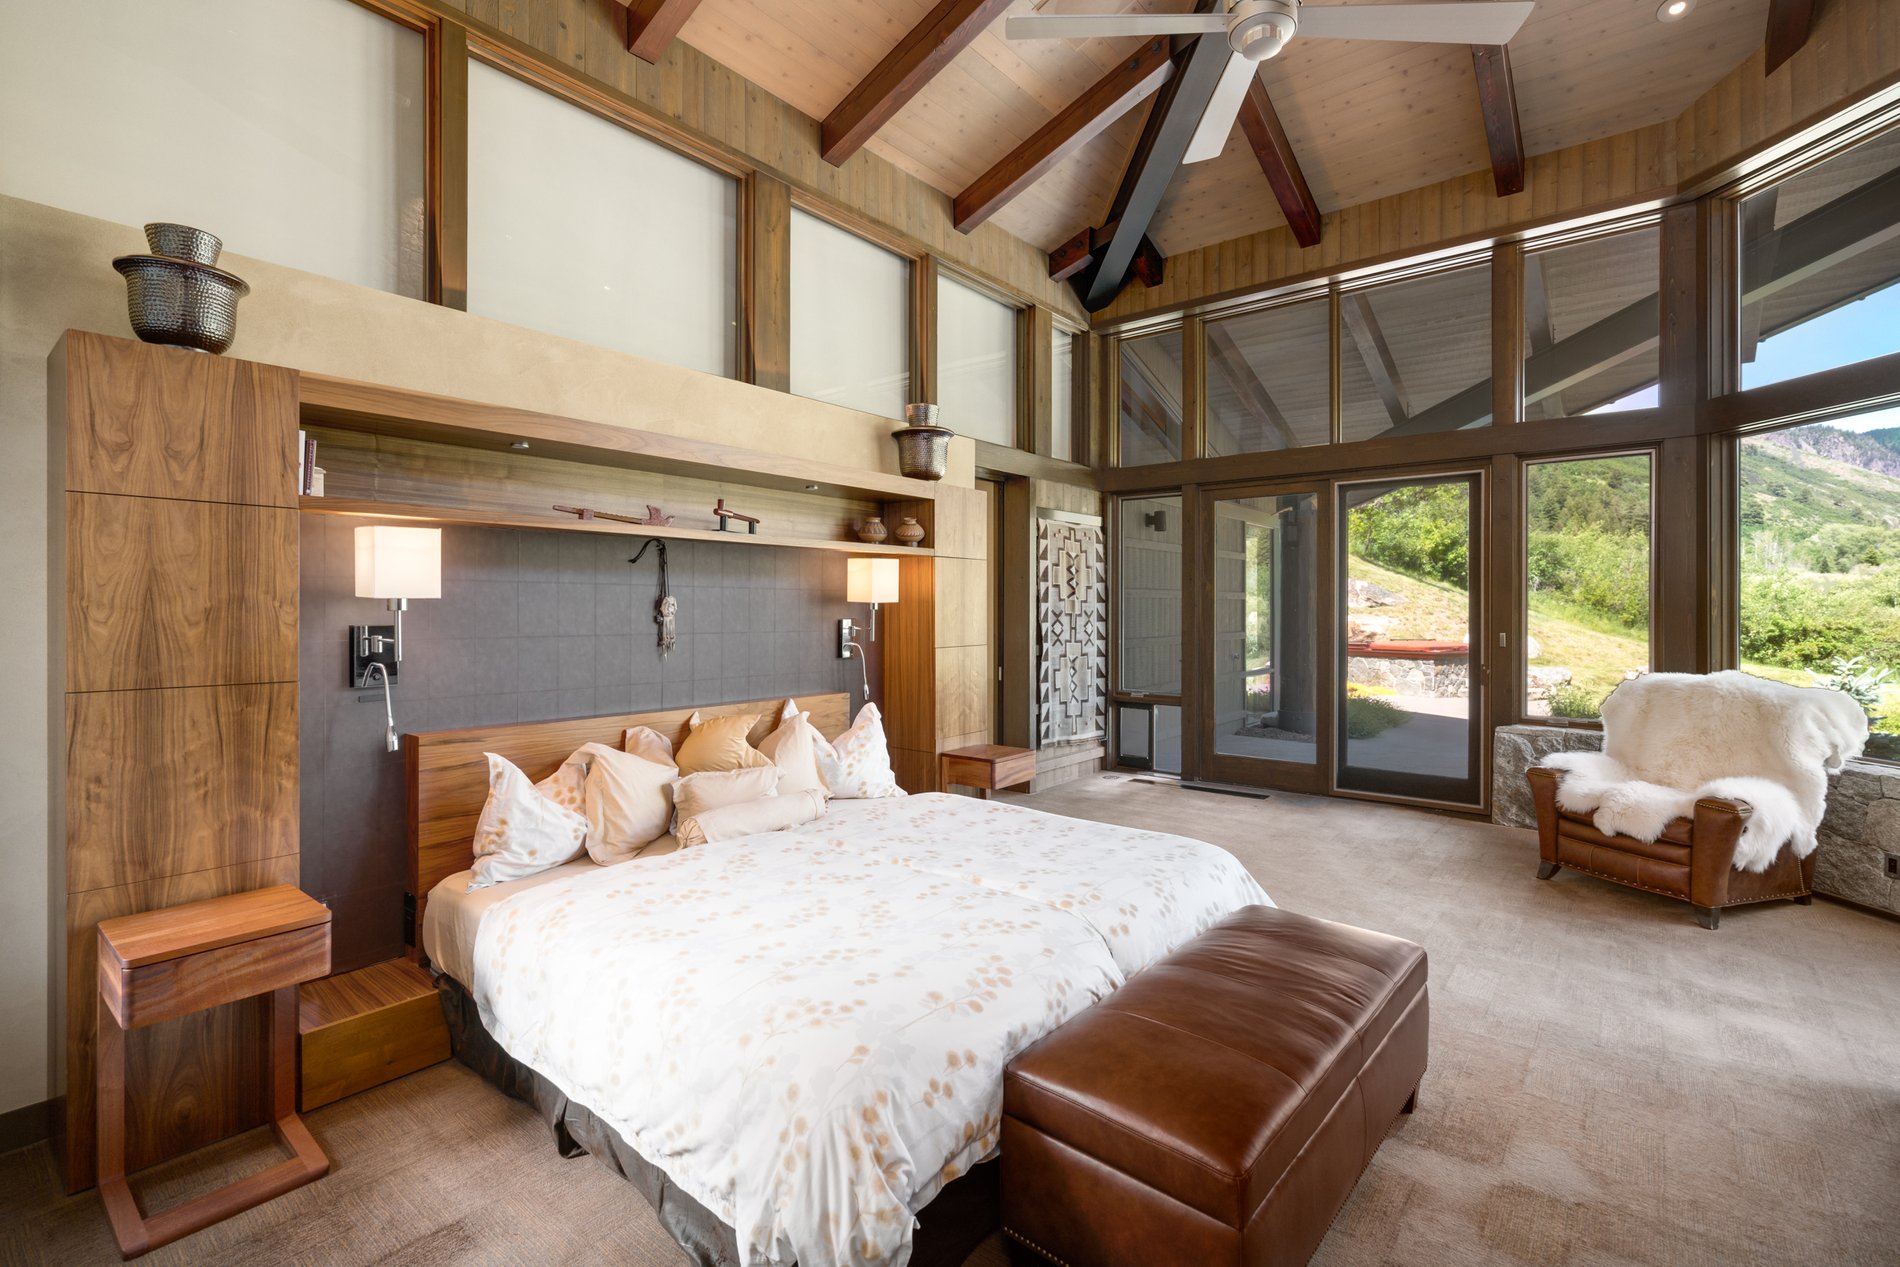 Master bedroom with floor to ceiling glass walls, exposed timber beams and a wood ceiling.